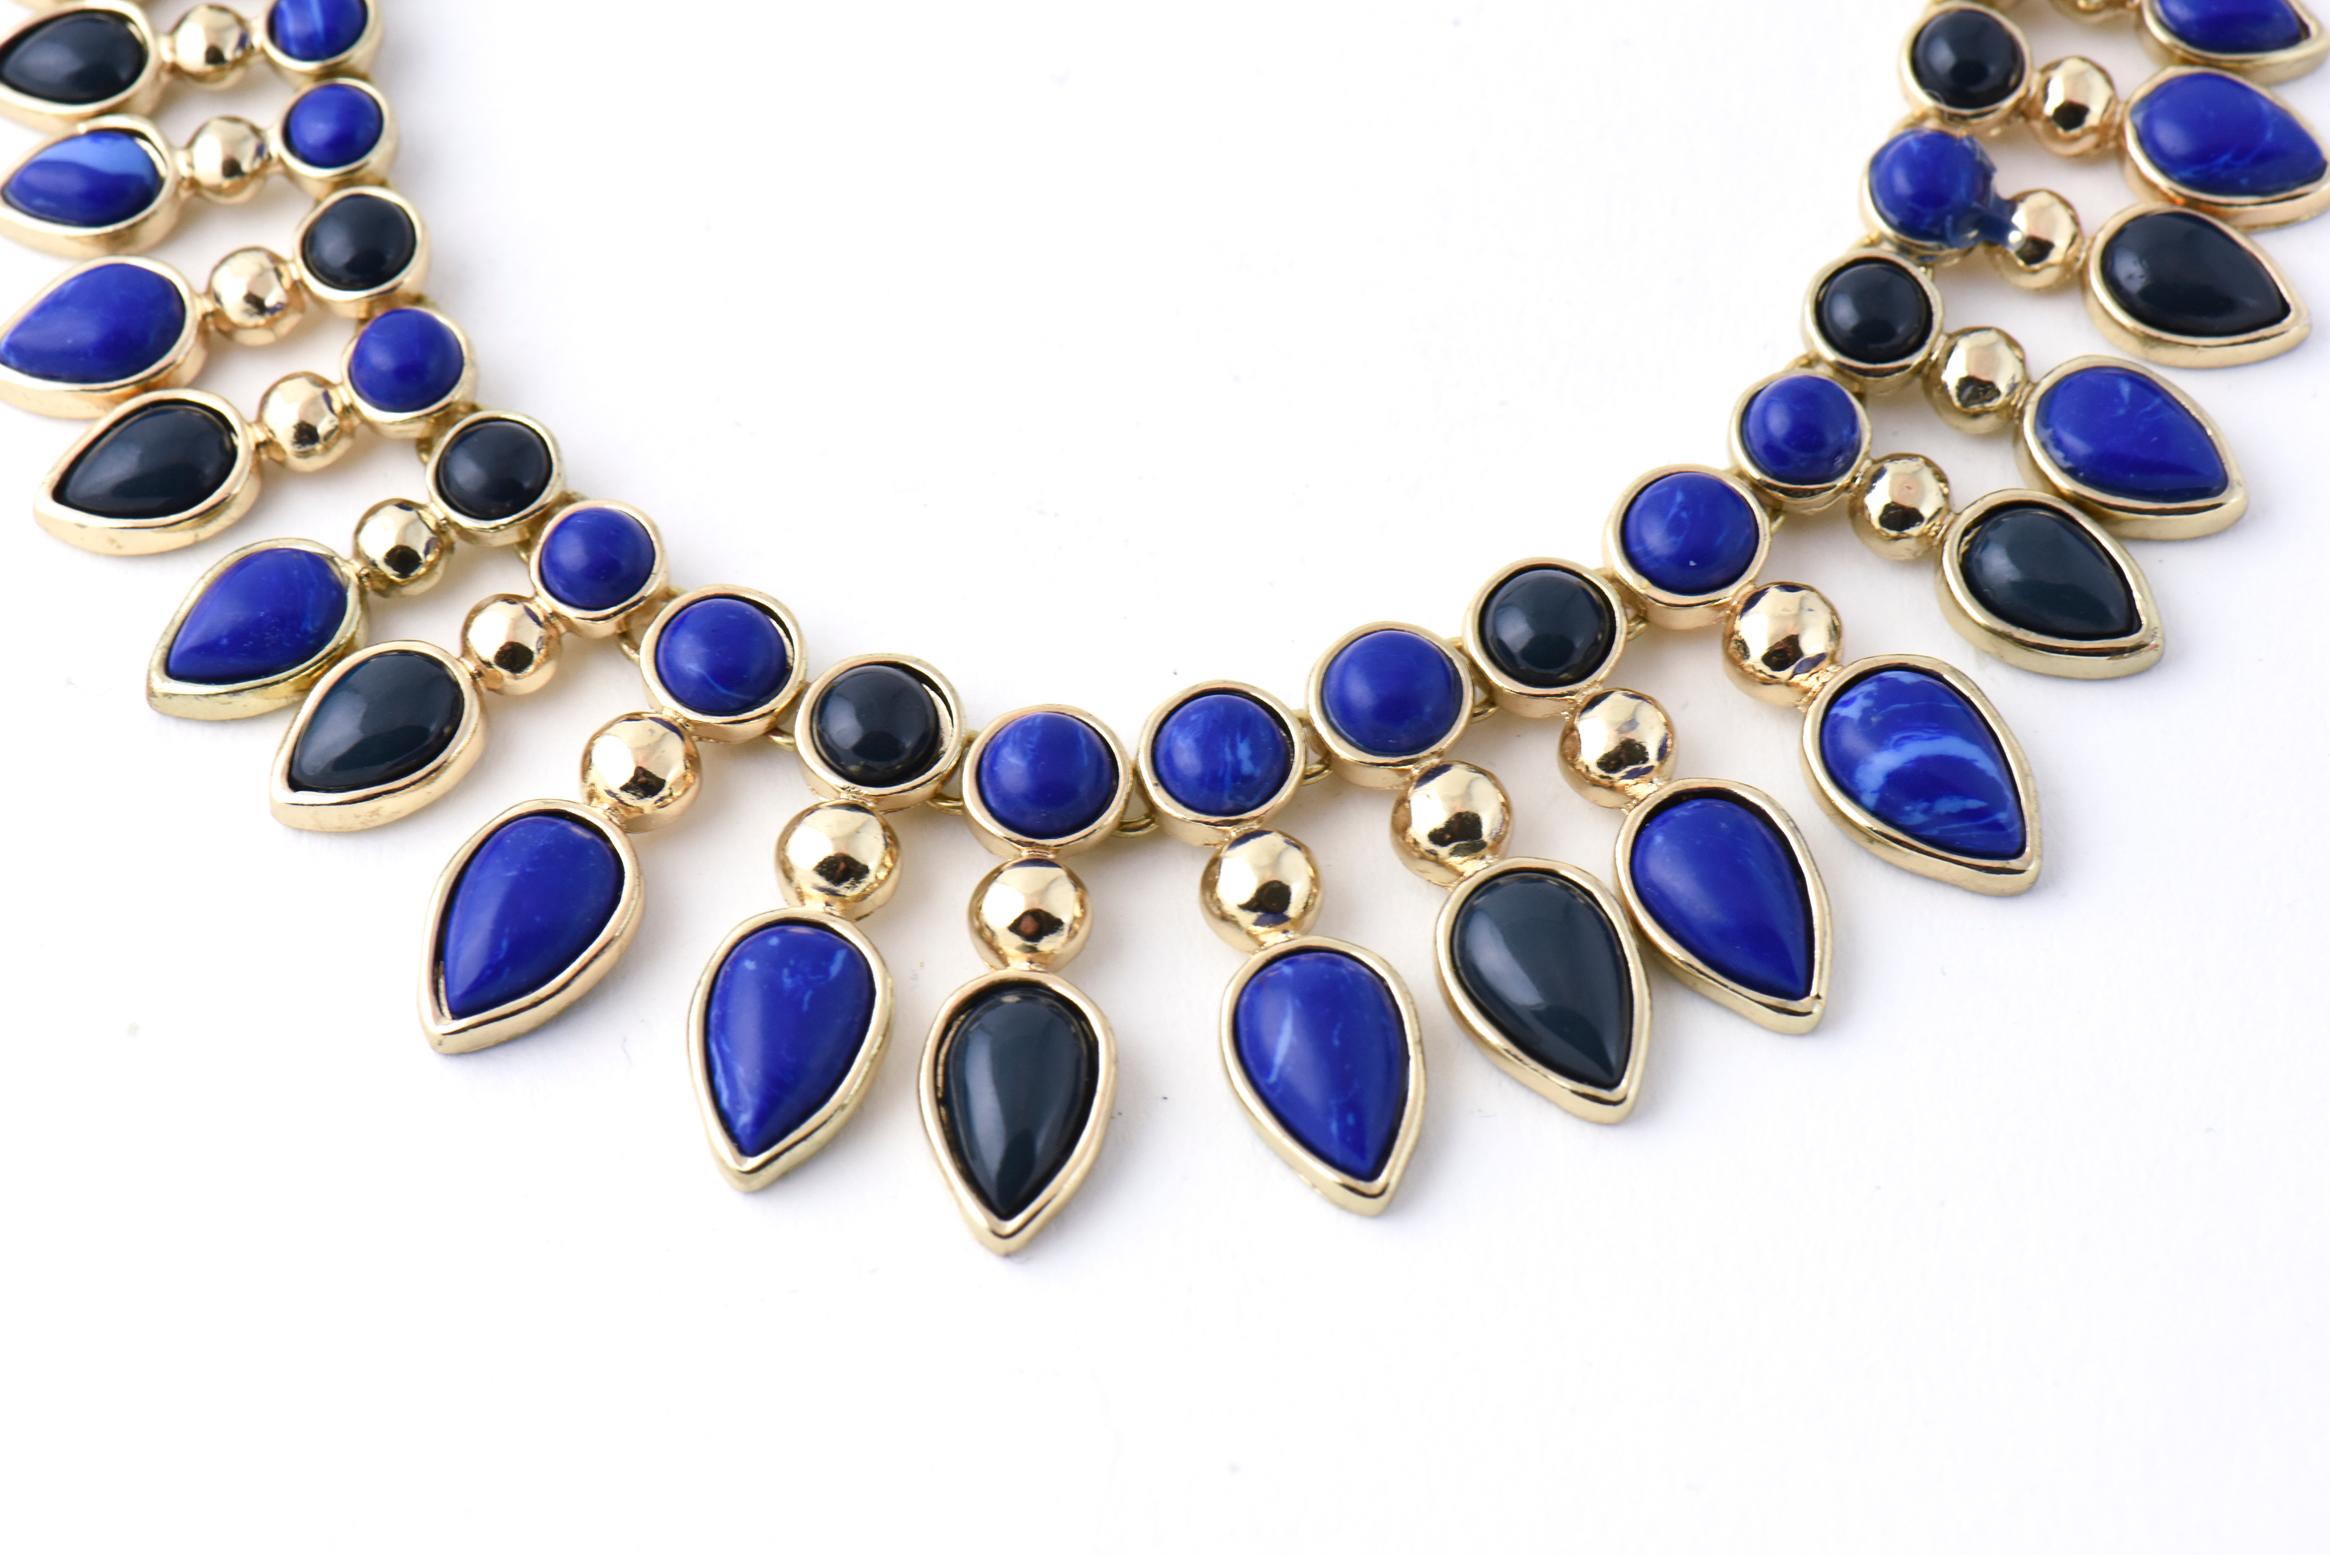 Stunning Cleopatra style necklace featuring costume blue and green resin pieces that  represent the jade and lapis lazuli often used in Egyptian jewelry.  The backside is as pretty as the front.  I believe you could wear it either way. The necklace